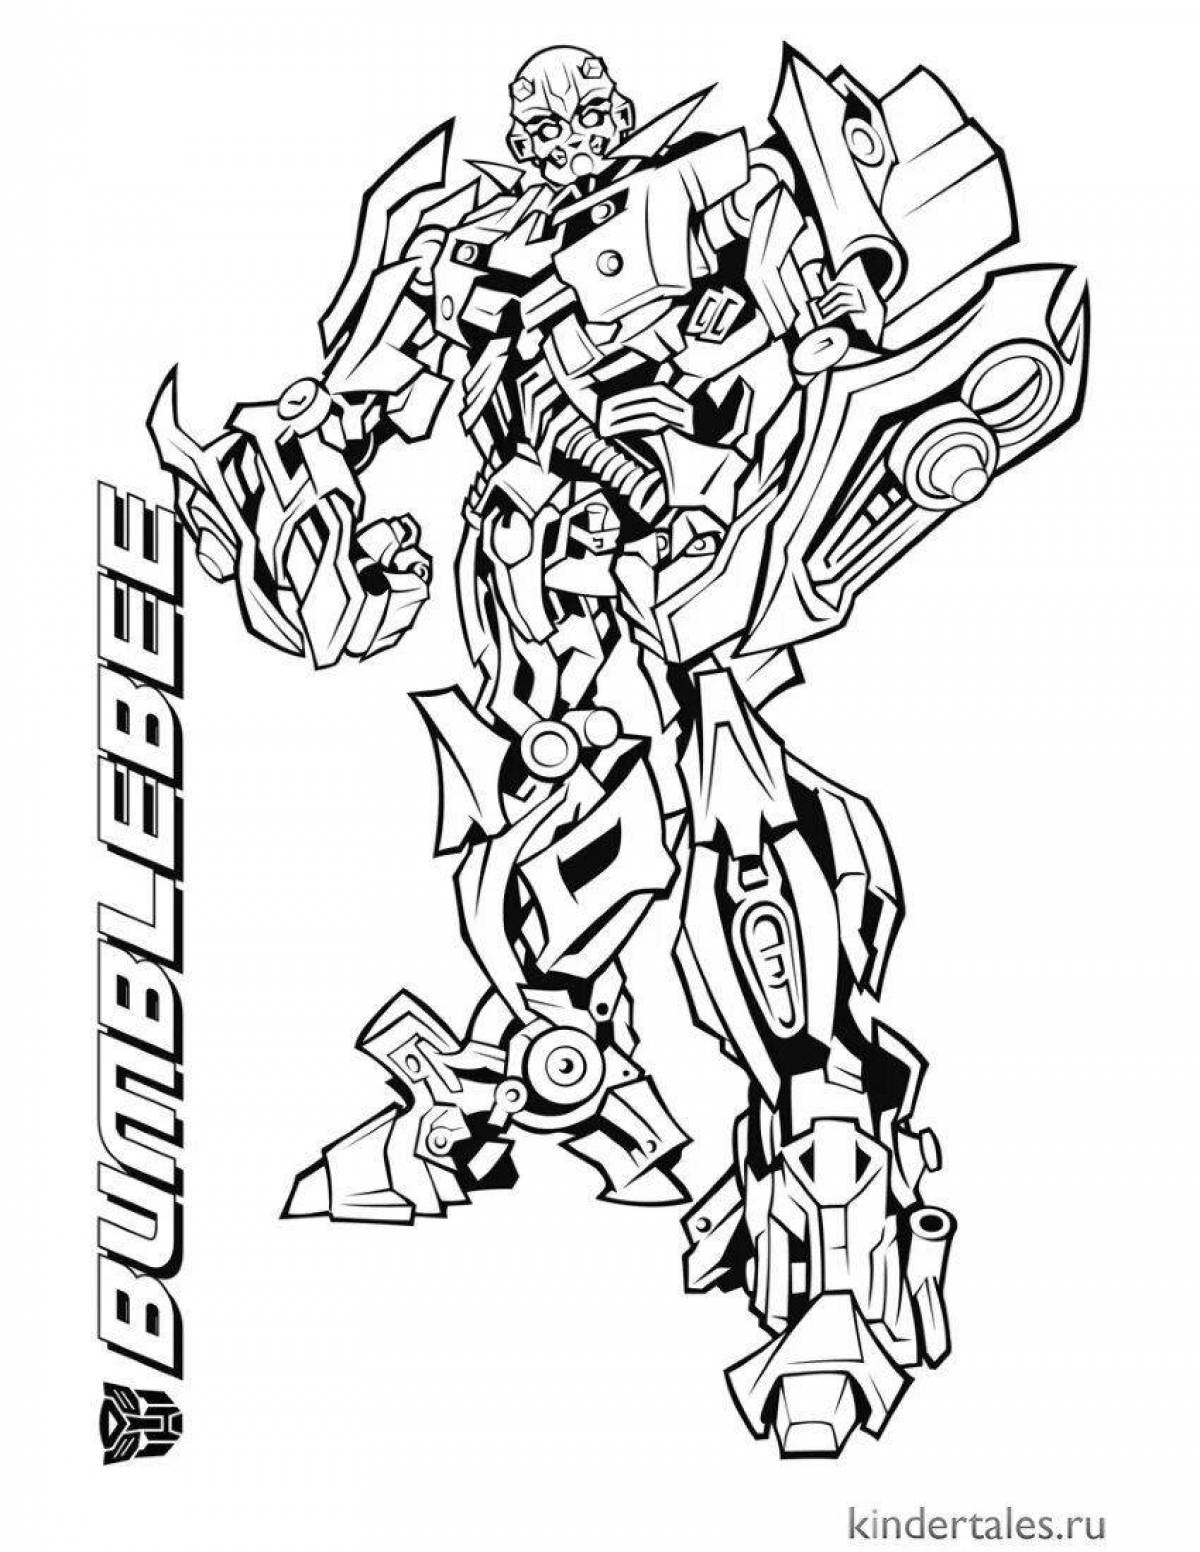 Colorful bumblebee coloring page